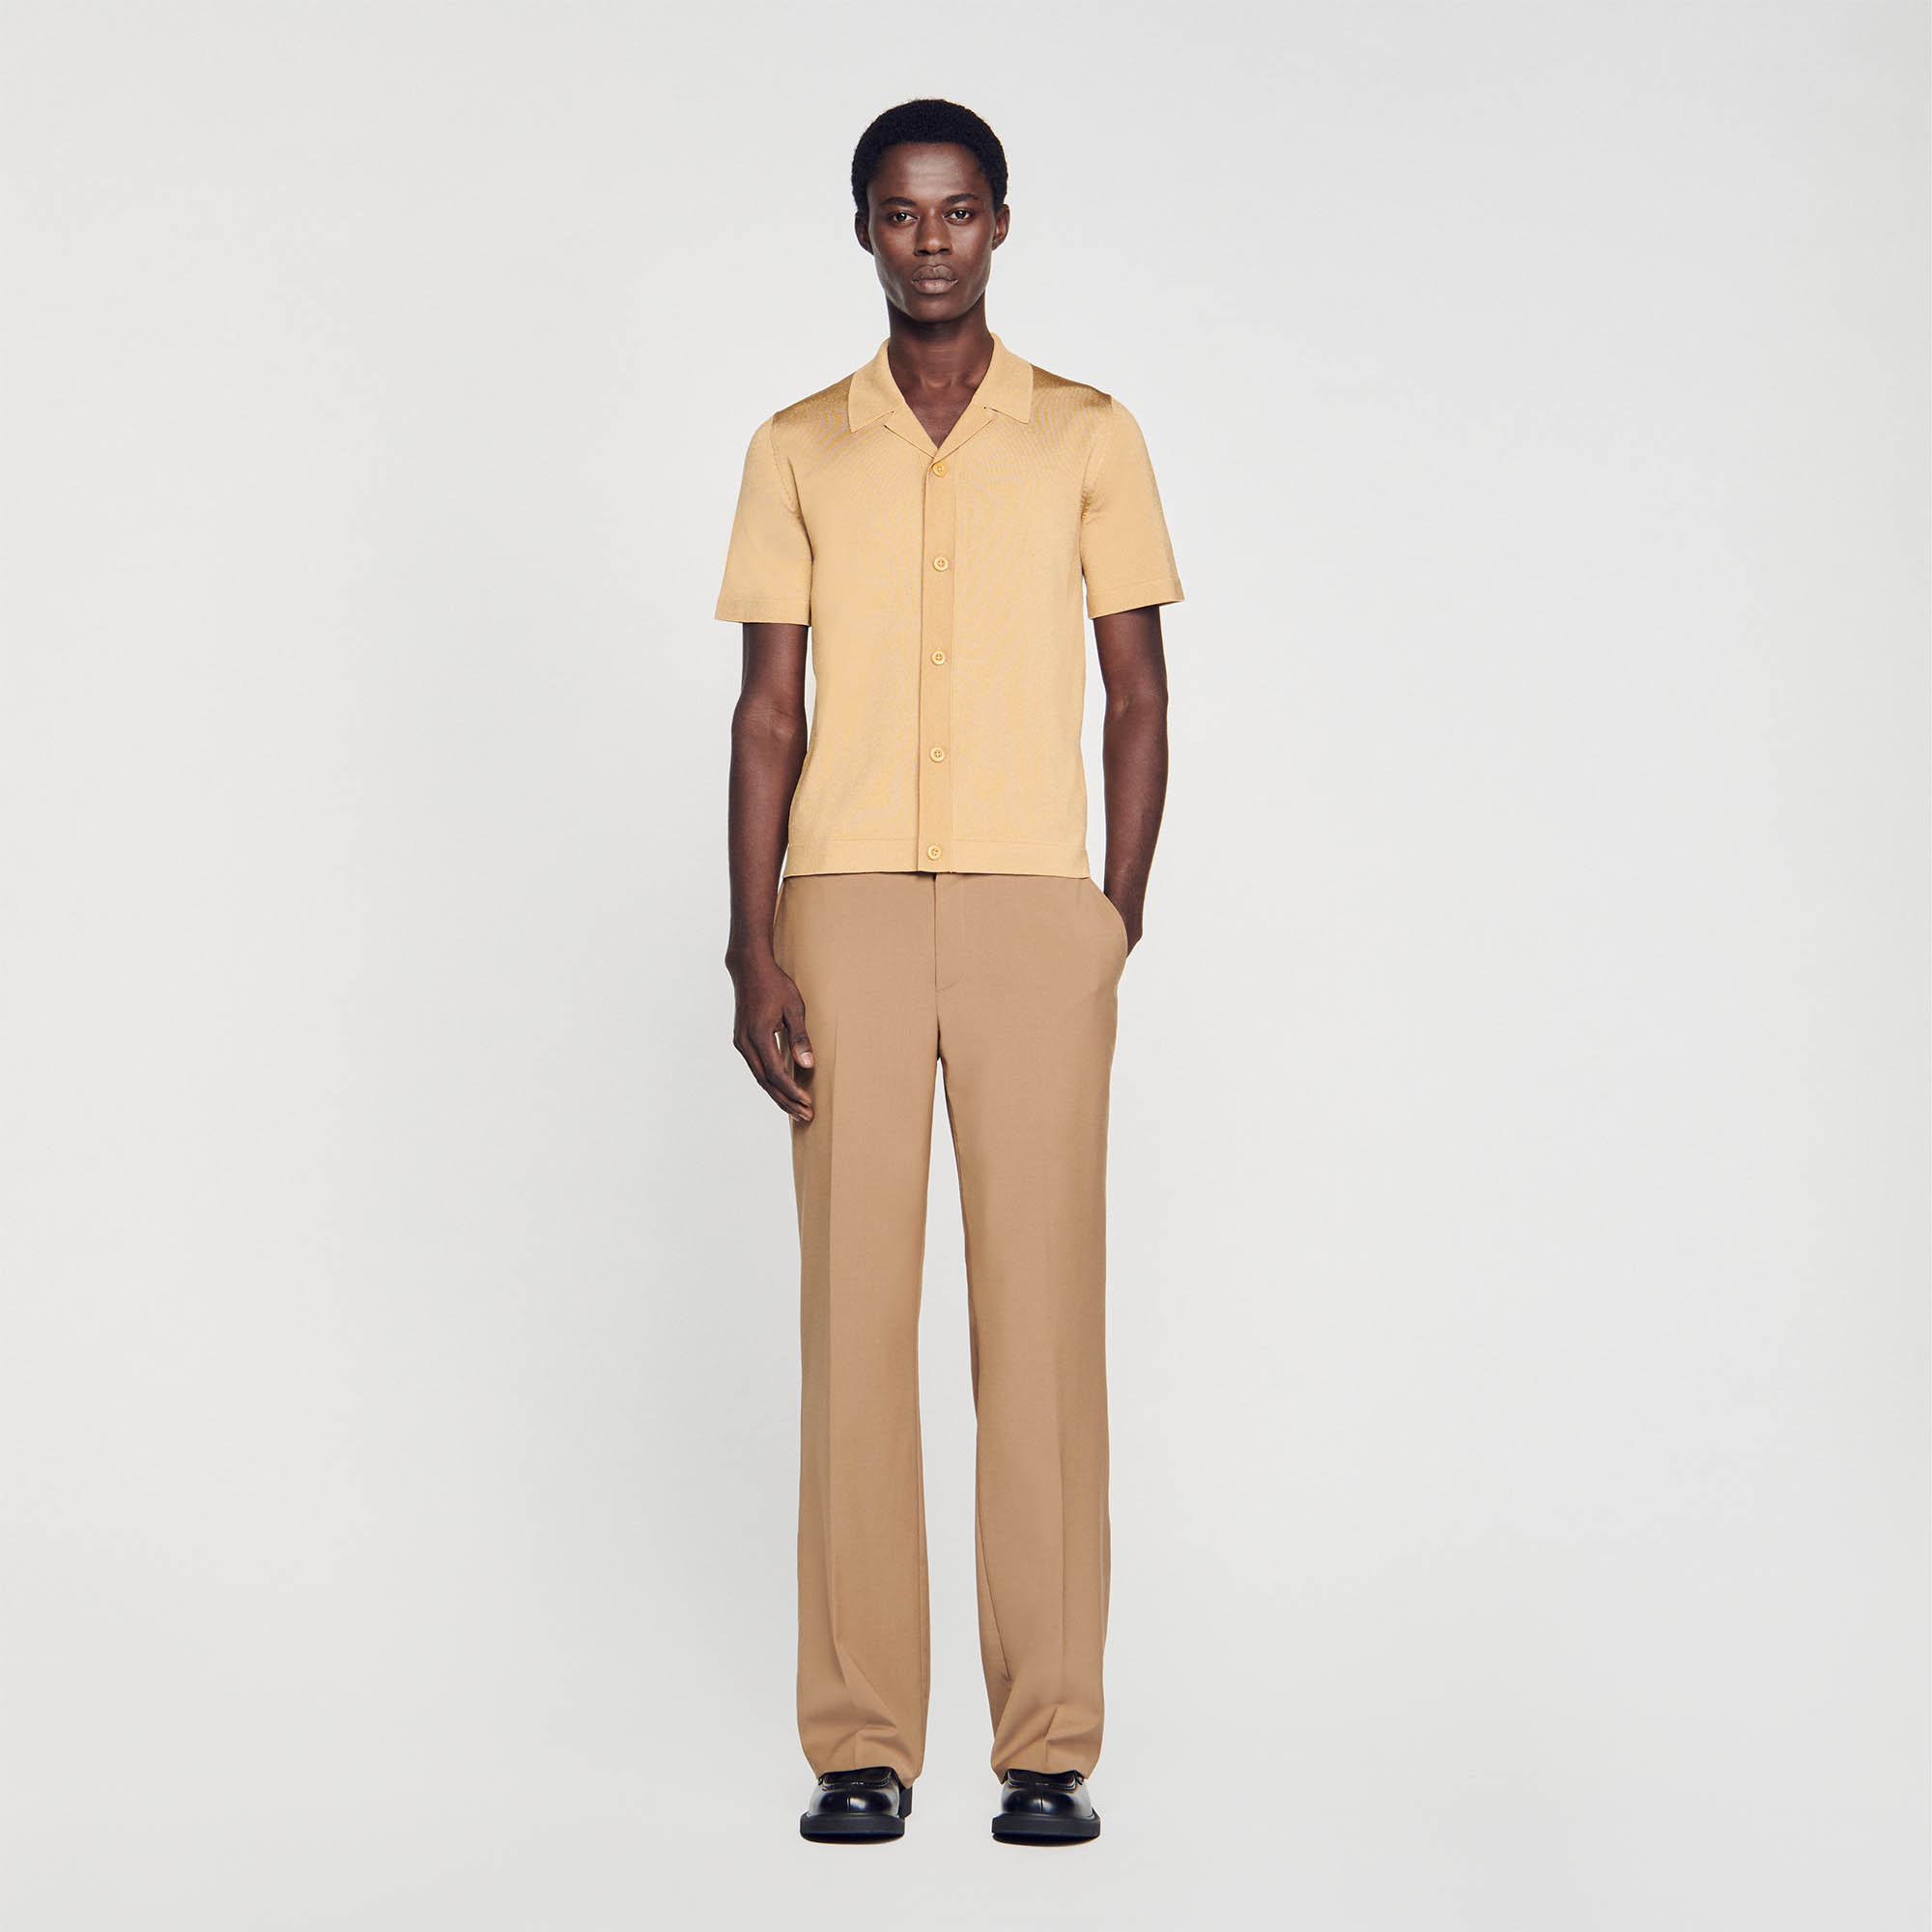 Sandro acetate Flowing short-sleeved shirt with a button fastening and a spread collar